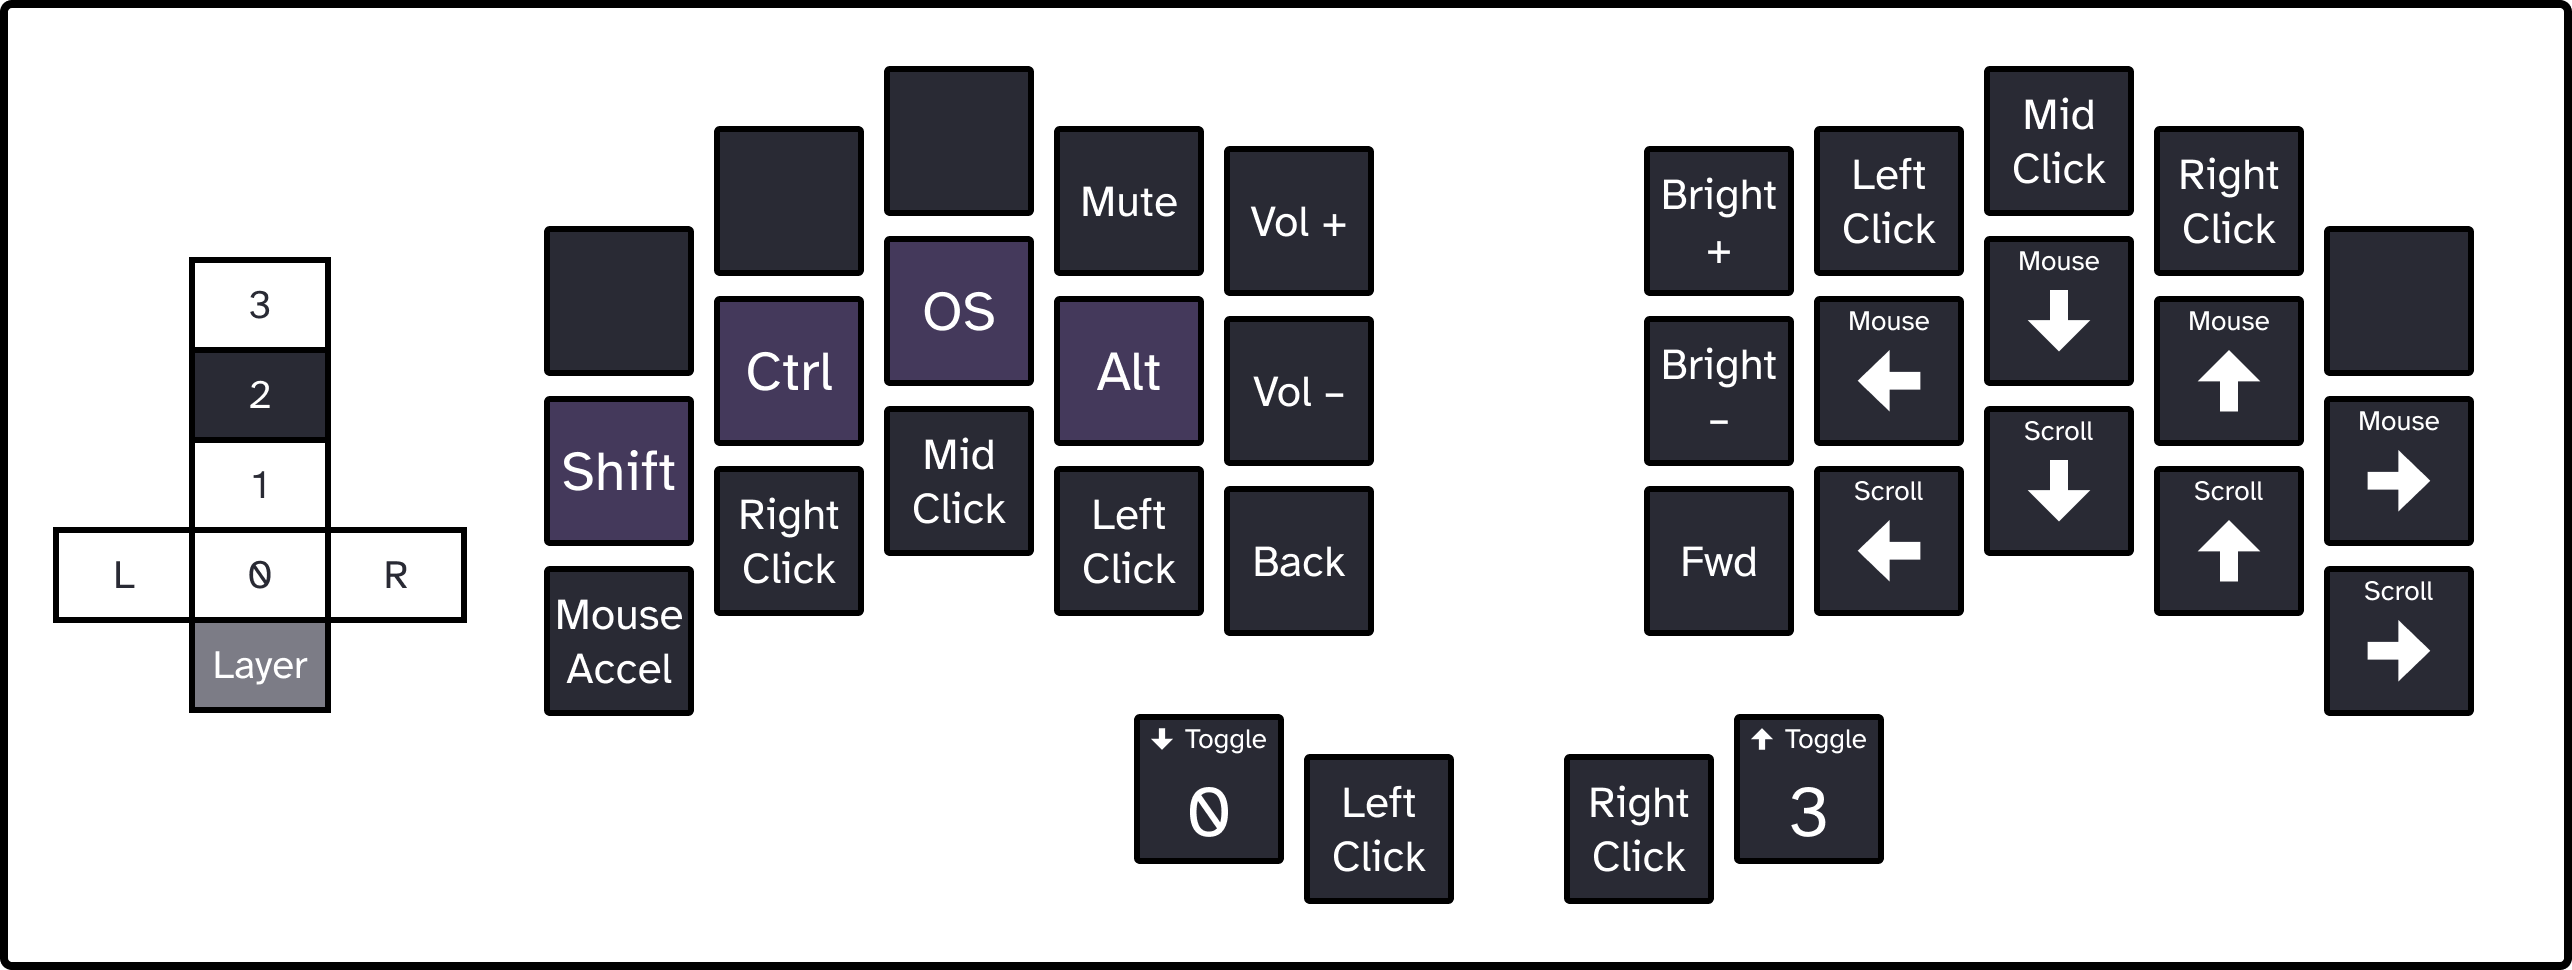 Layer 2 of my new keyboard layout for the Ferris Sweep. Keys from left to right, going down each finger from top to bottom. Left pinky: Pass, Shift, Mouse Acceleration Increase. Left ring: Pass, Control, Right Click. Left middle: Pass, OS, Middle Click. Left index first column: Mute, Alt, Left Click. Left index second column: Volume Up, Volume Down, Browser Back. Left thumb 1: Left Click. Left thumb 2: Toggle Layer 0. Right thumb 1: Right Click. Right thumb 2: toggle Layer 3. Right index 2: Brightness Increase, Brightness Decrease, Browser Forward. Right index 1: Left Click, Mouse Left, Scroll Left. Right middle: Middle Click, Mouse Down, Scroll Down. Right ring: Right Click, Mouse Up, Scroll Up. Right pinky: Pass, Mouse Right, Scroll Right.